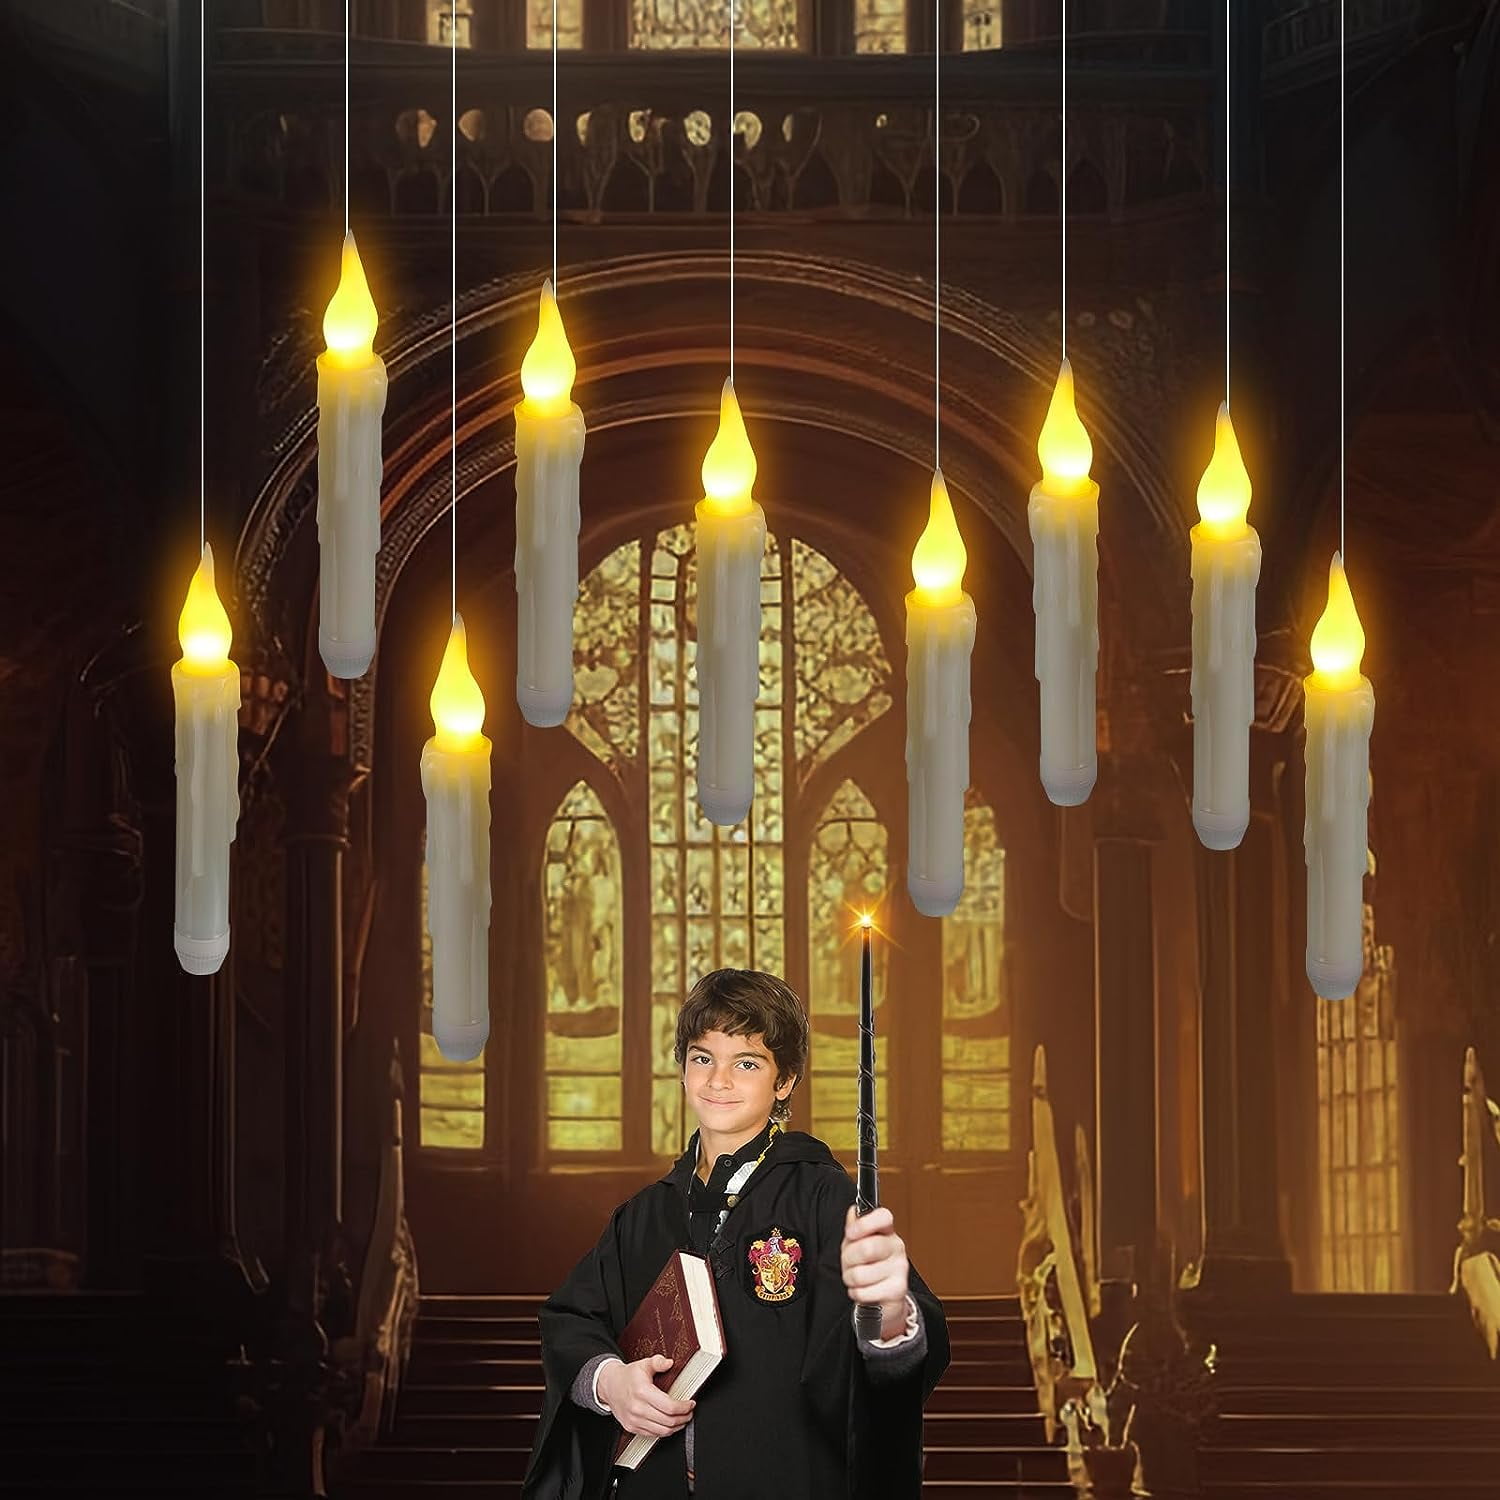 12 Harry Potter Floating LED Candles with Wand Remote, Party Decorations,  Flameless Batteries Operated Taper Hanging candlesticks for Party Christmas